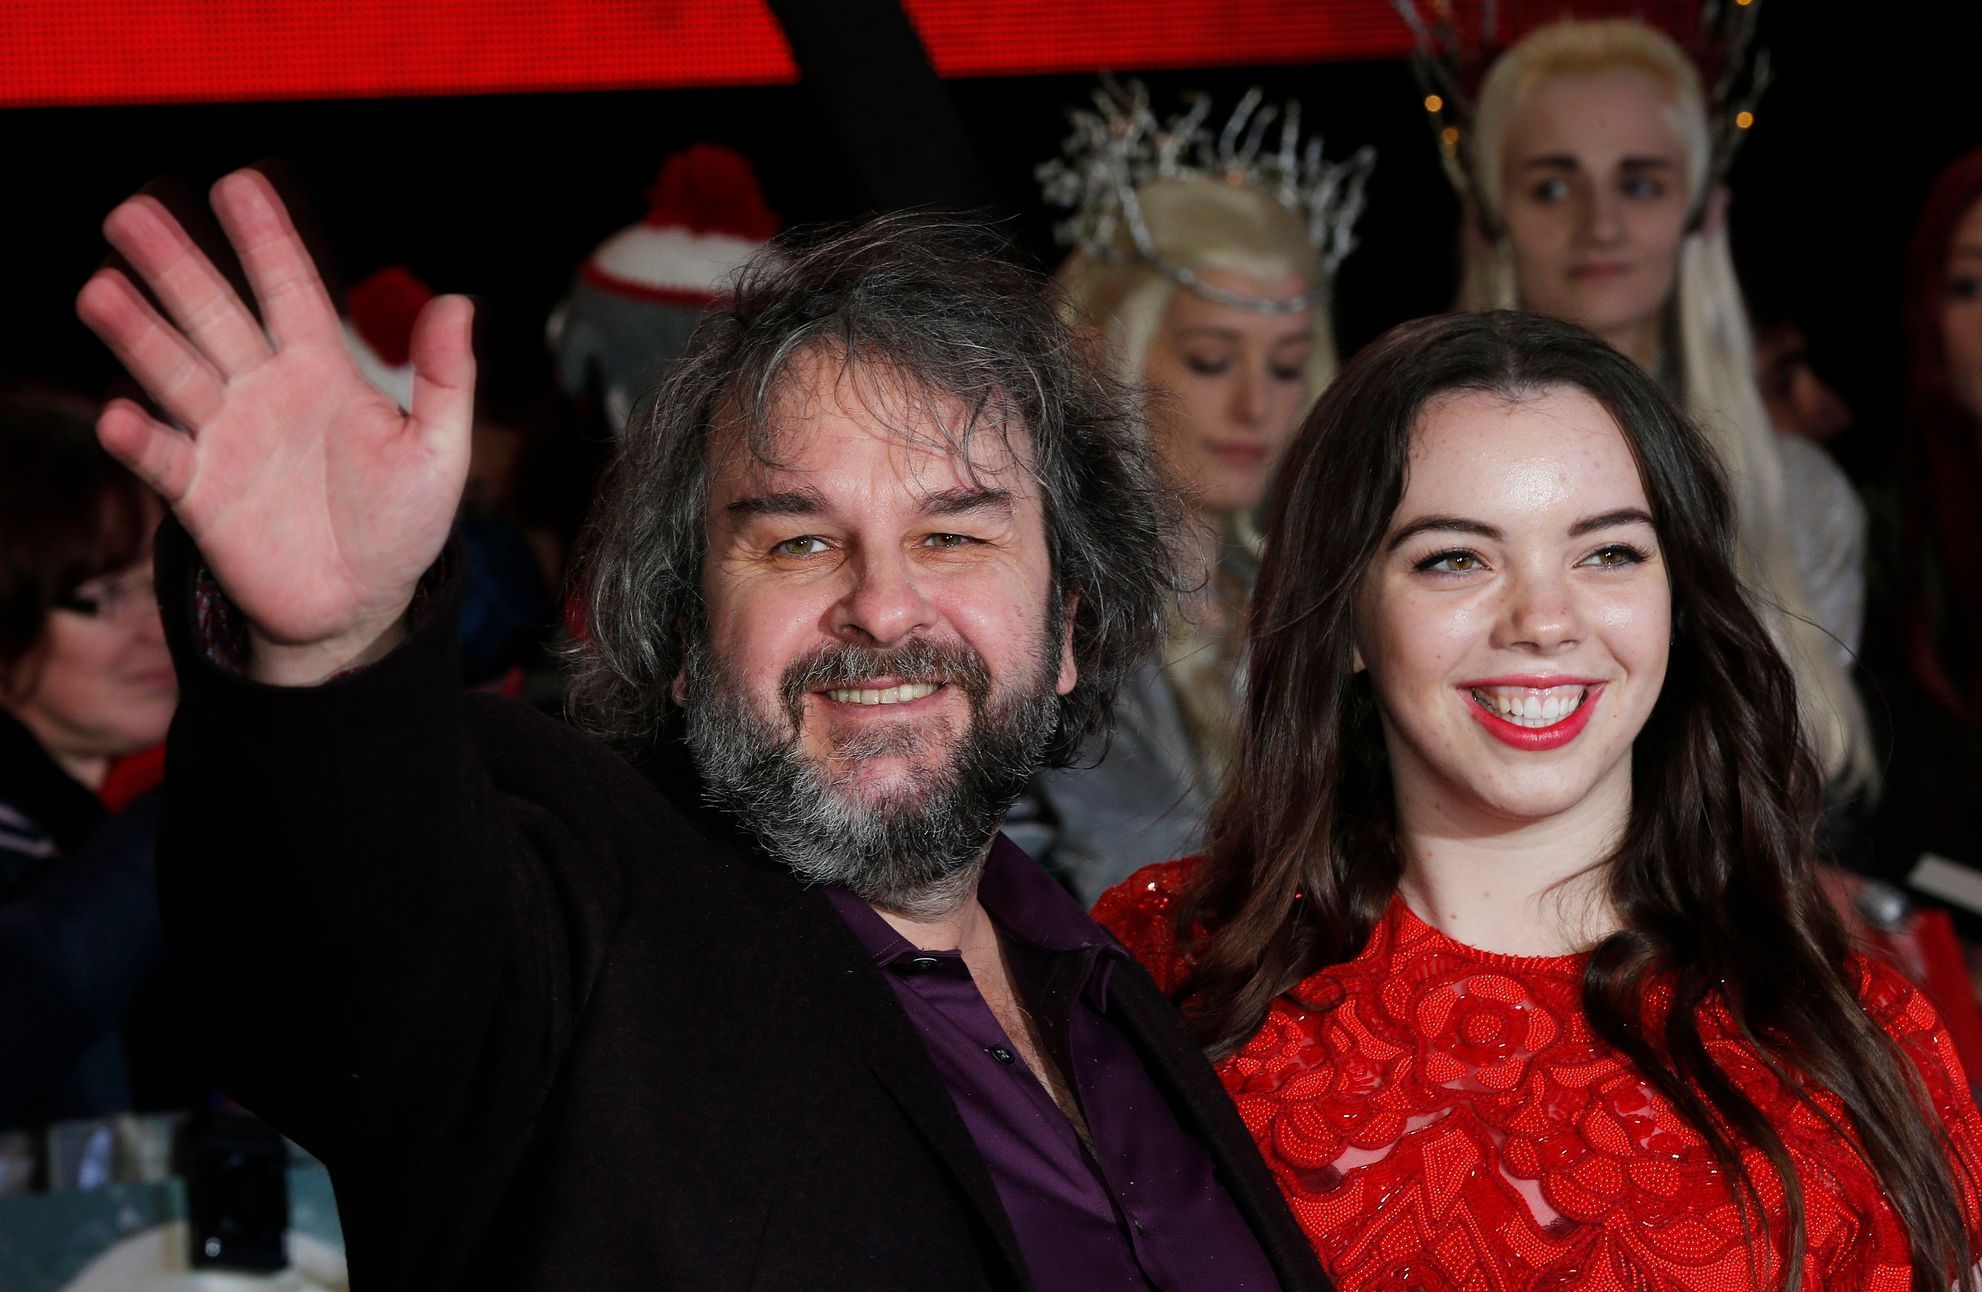 Director Jackson poses with his daughter Katie as they arrive for the world film premiere of &quot;The Hobbit: The Battle of the Five Armies&quot; at Leicester Square in central London